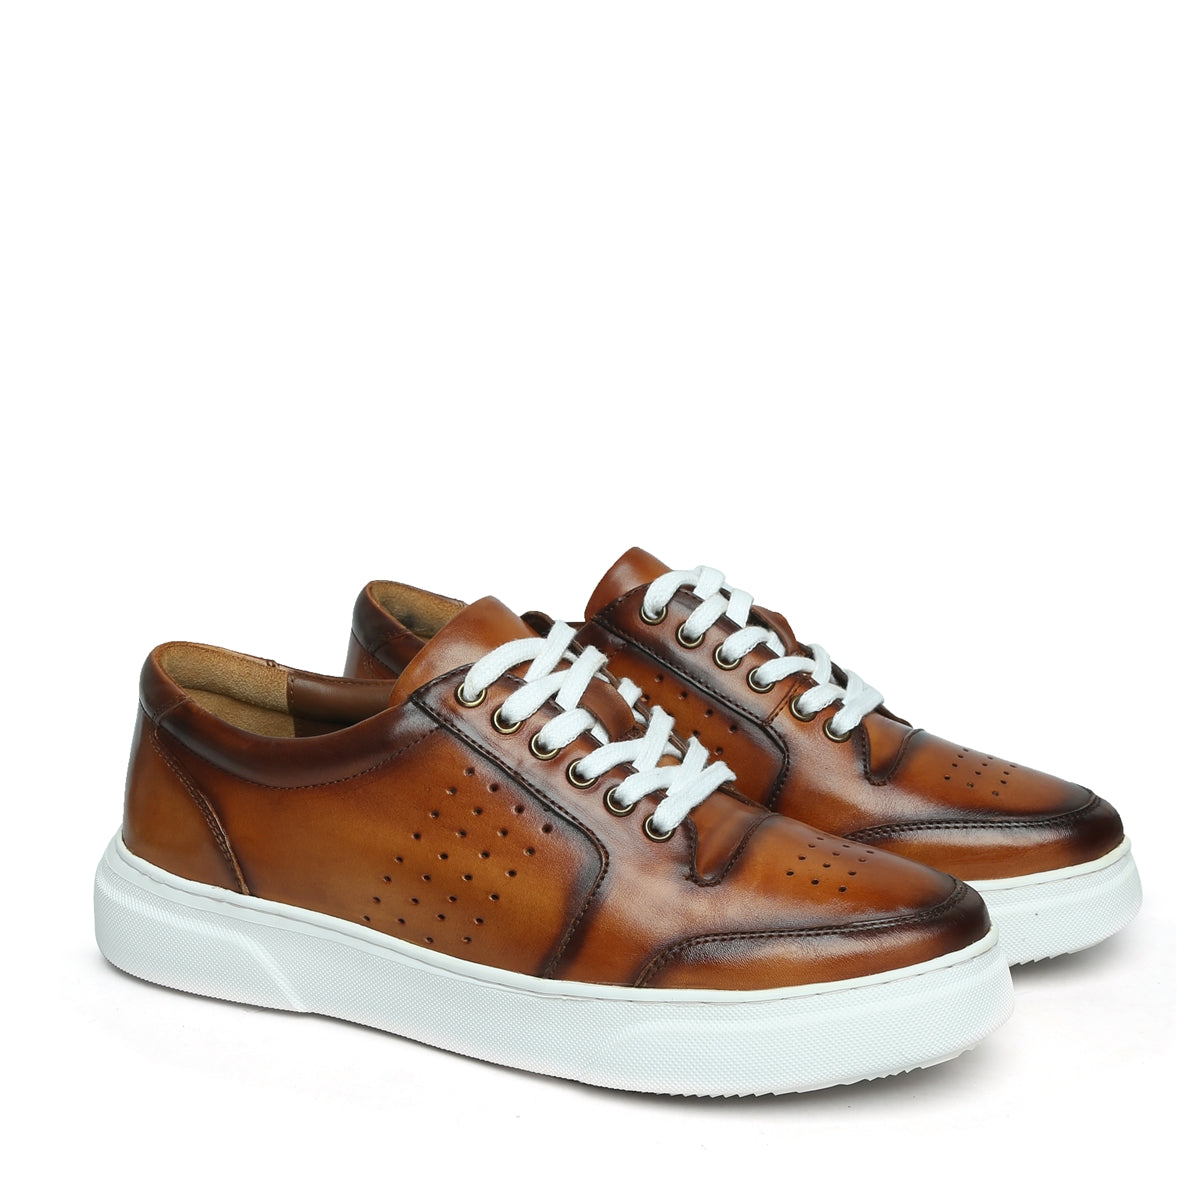 Tan Burnished Leather Low Top Perforated Sneakers by Brune & Bareskin